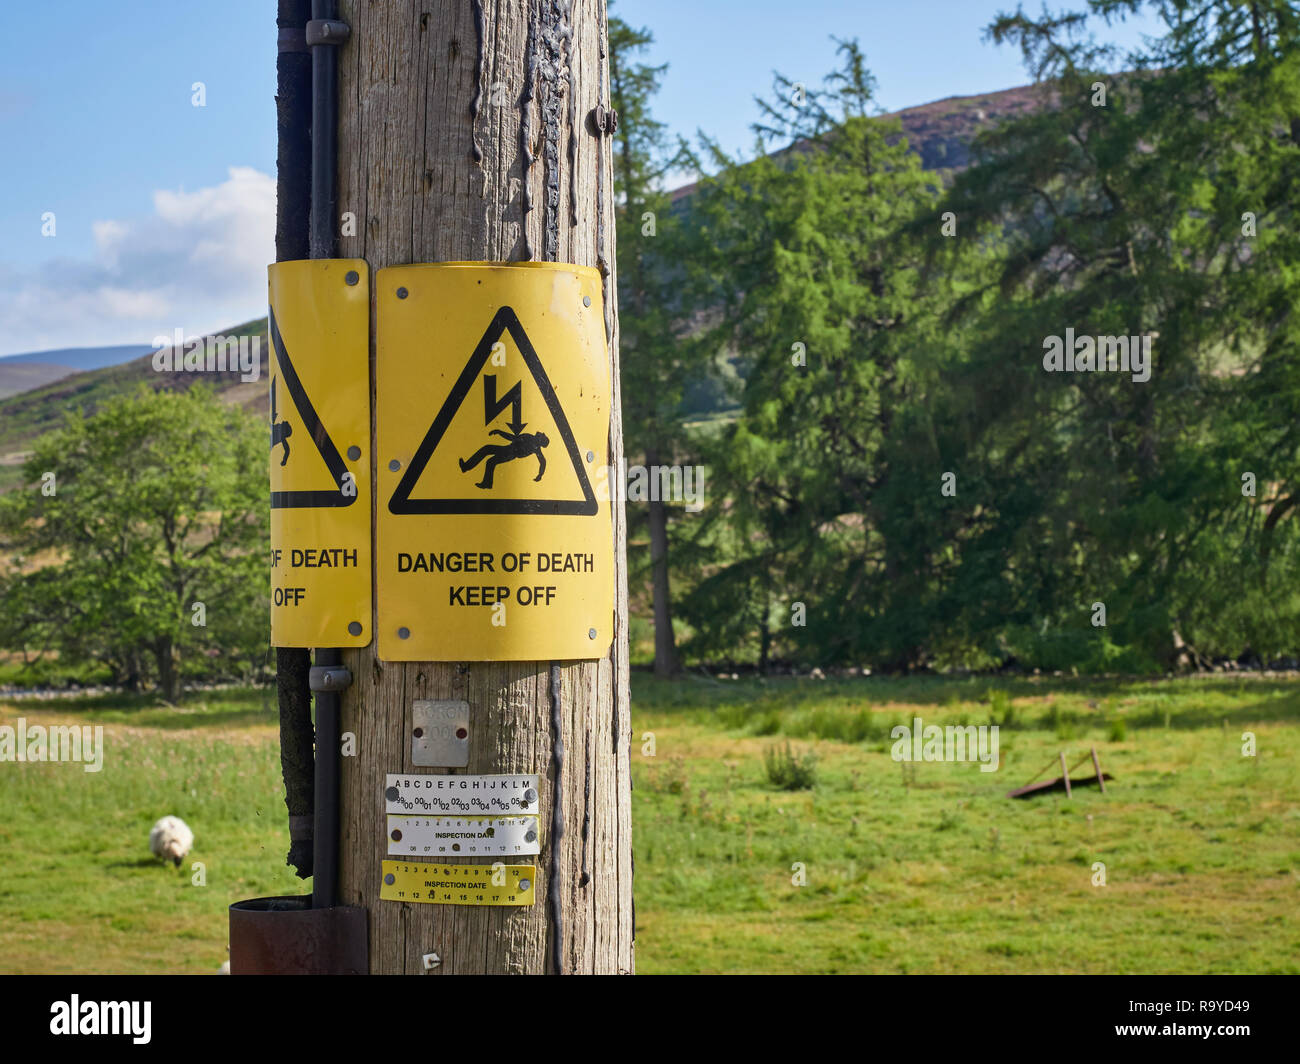 The Yellow warning signs nailed to a Wooden Power pole warning People of the Danger of death if the Pole is touched or climbed on. Angus, Scotland. Stock Photo